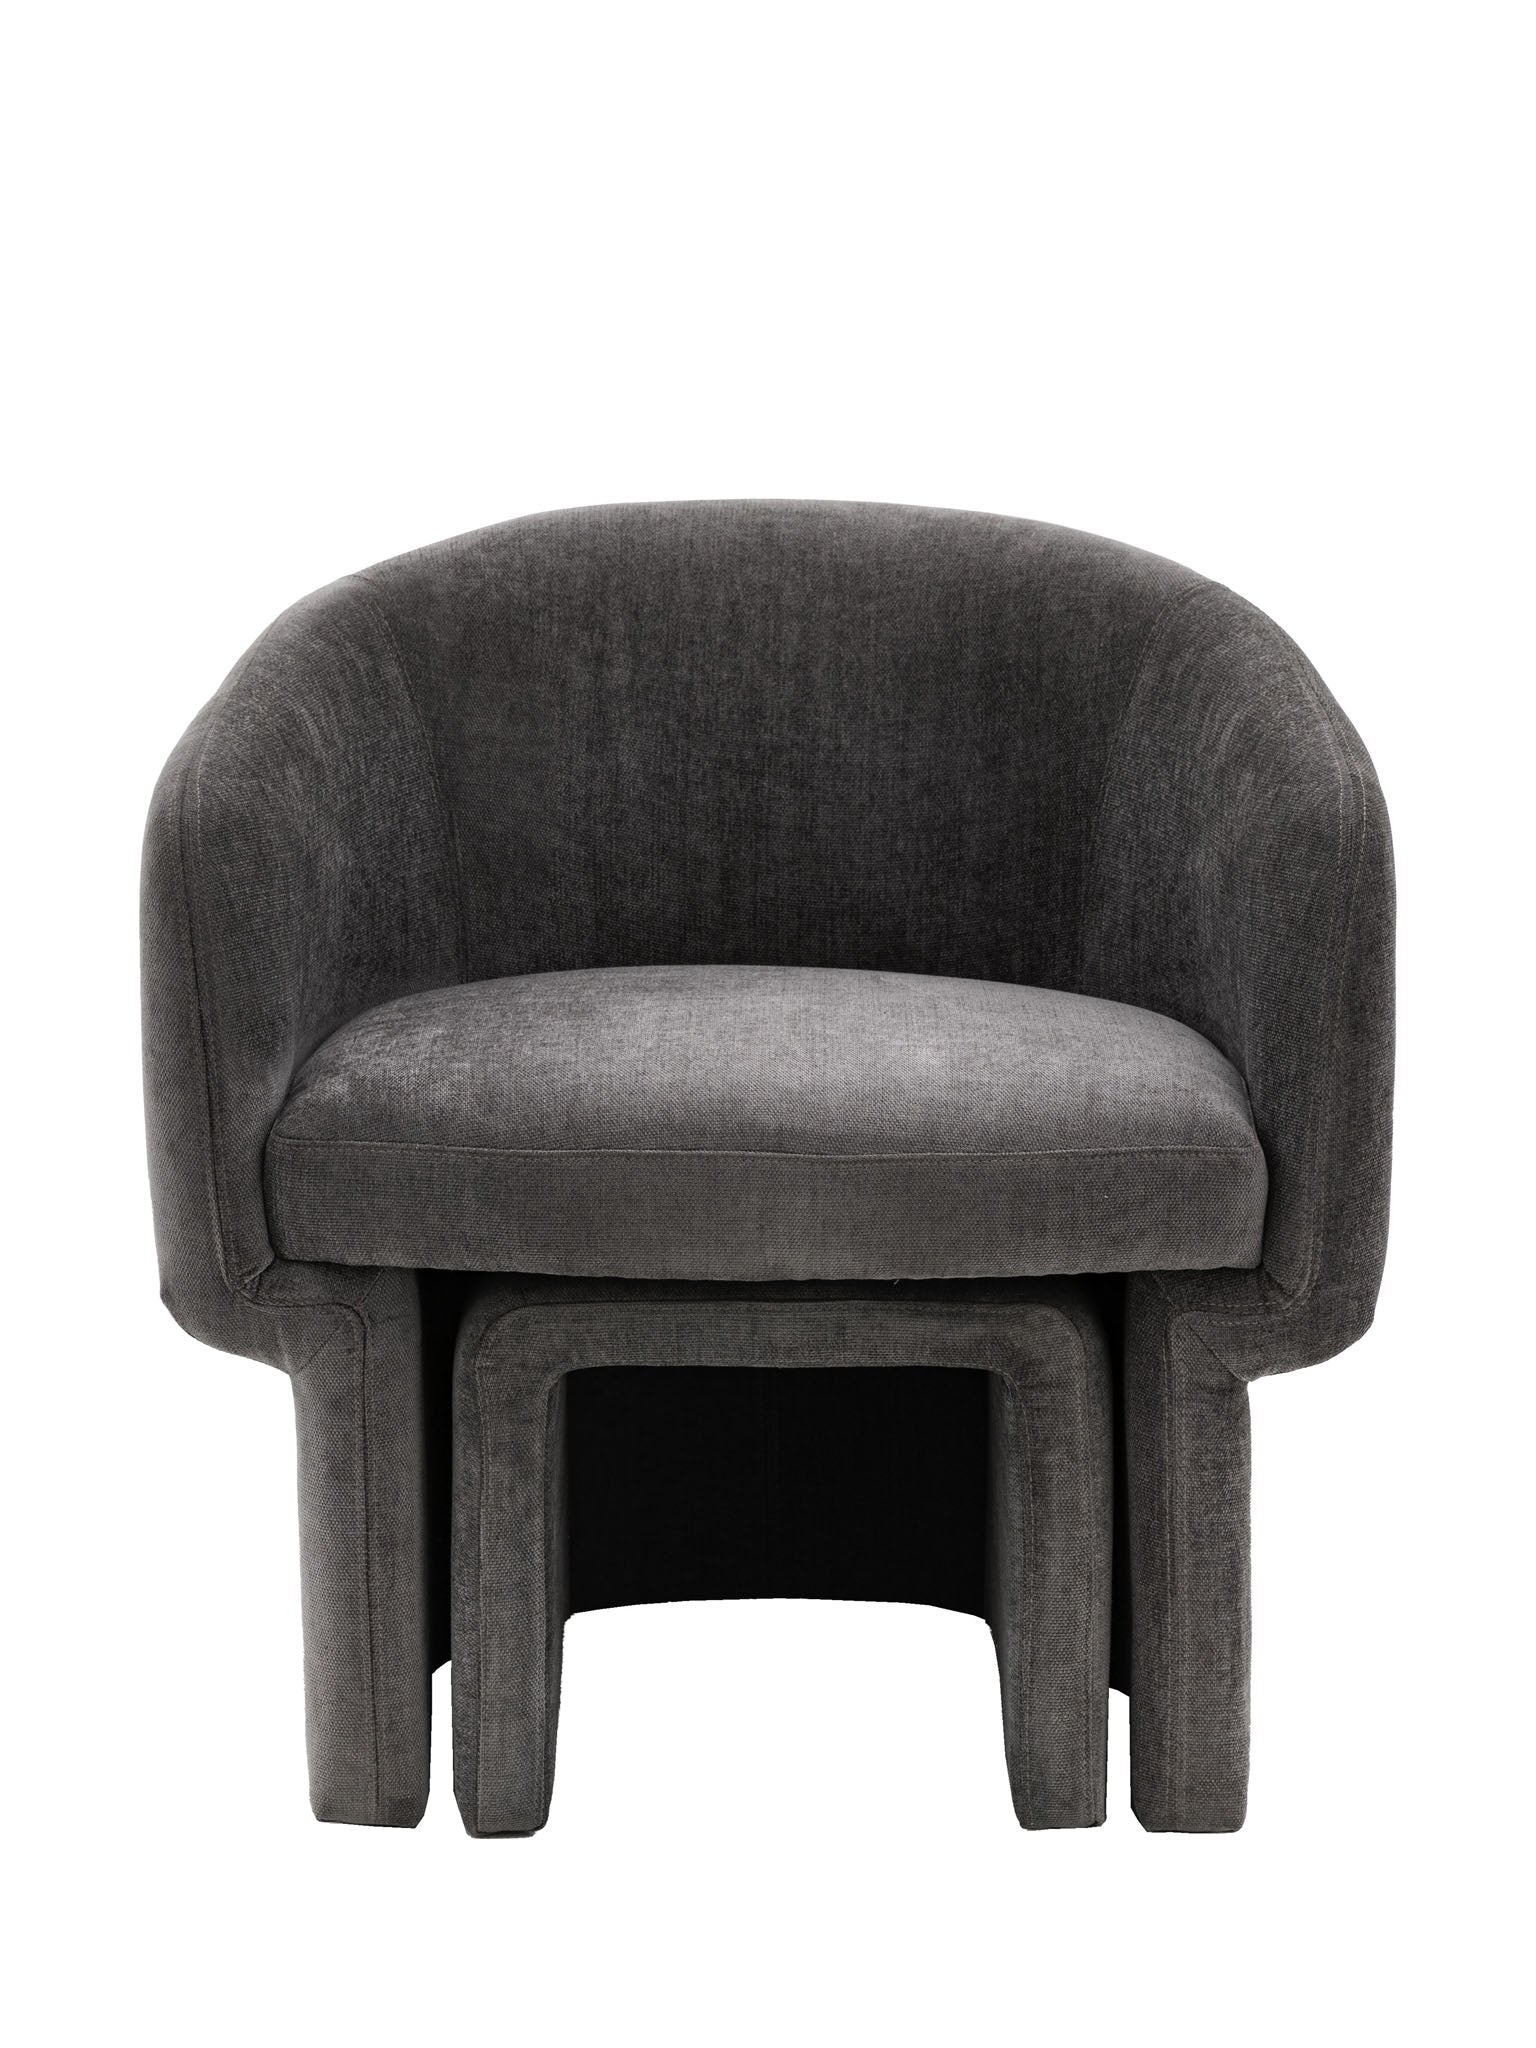 Aslan Armchair in anthracite, retro design, smooth curved back, vintage influence, 